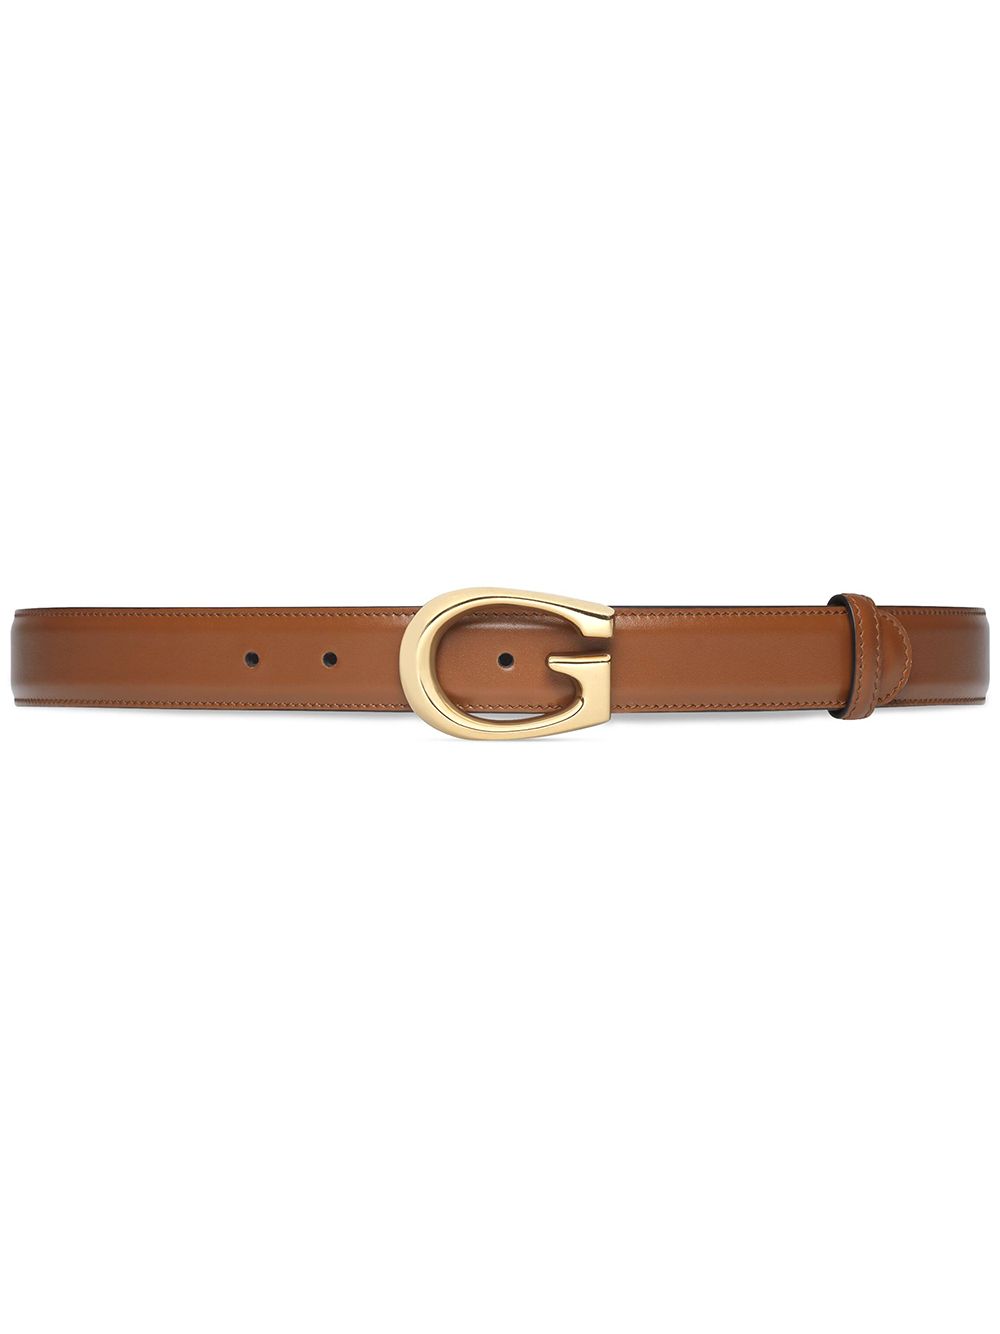 GUCCI G-BUCKLE LEATHER BELT